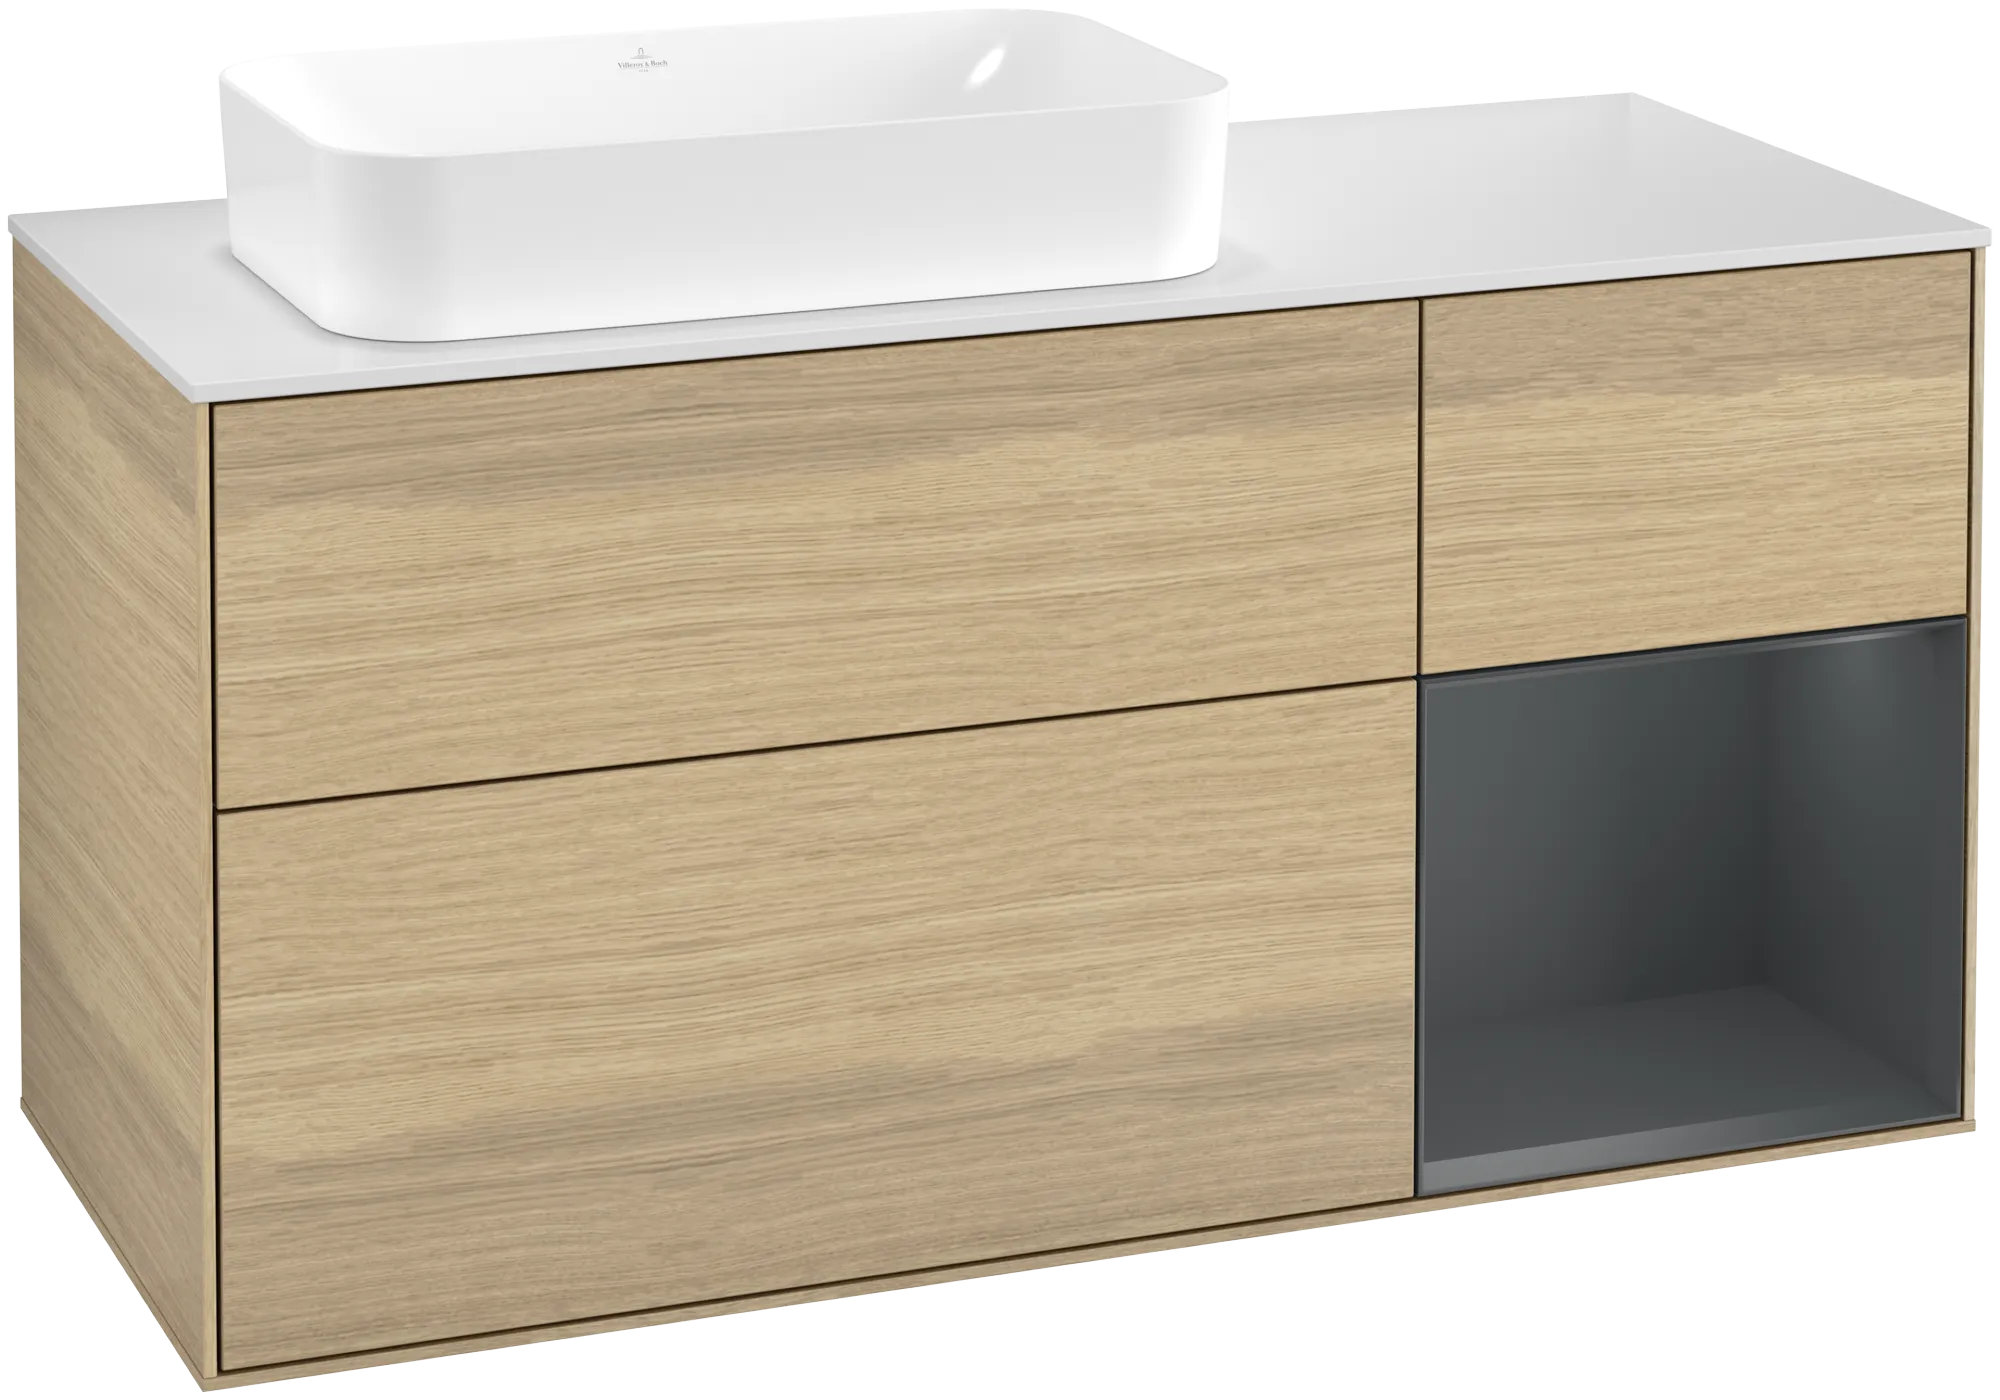 Picture of VILLEROY BOCH Finion Vanity unit, with lighting, 3 pull-out compartments, 1200 x 603 x 501 mm, Oak Veneer / Midnight Blue Matt Lacquer / Glass White Matt #G691HGPC